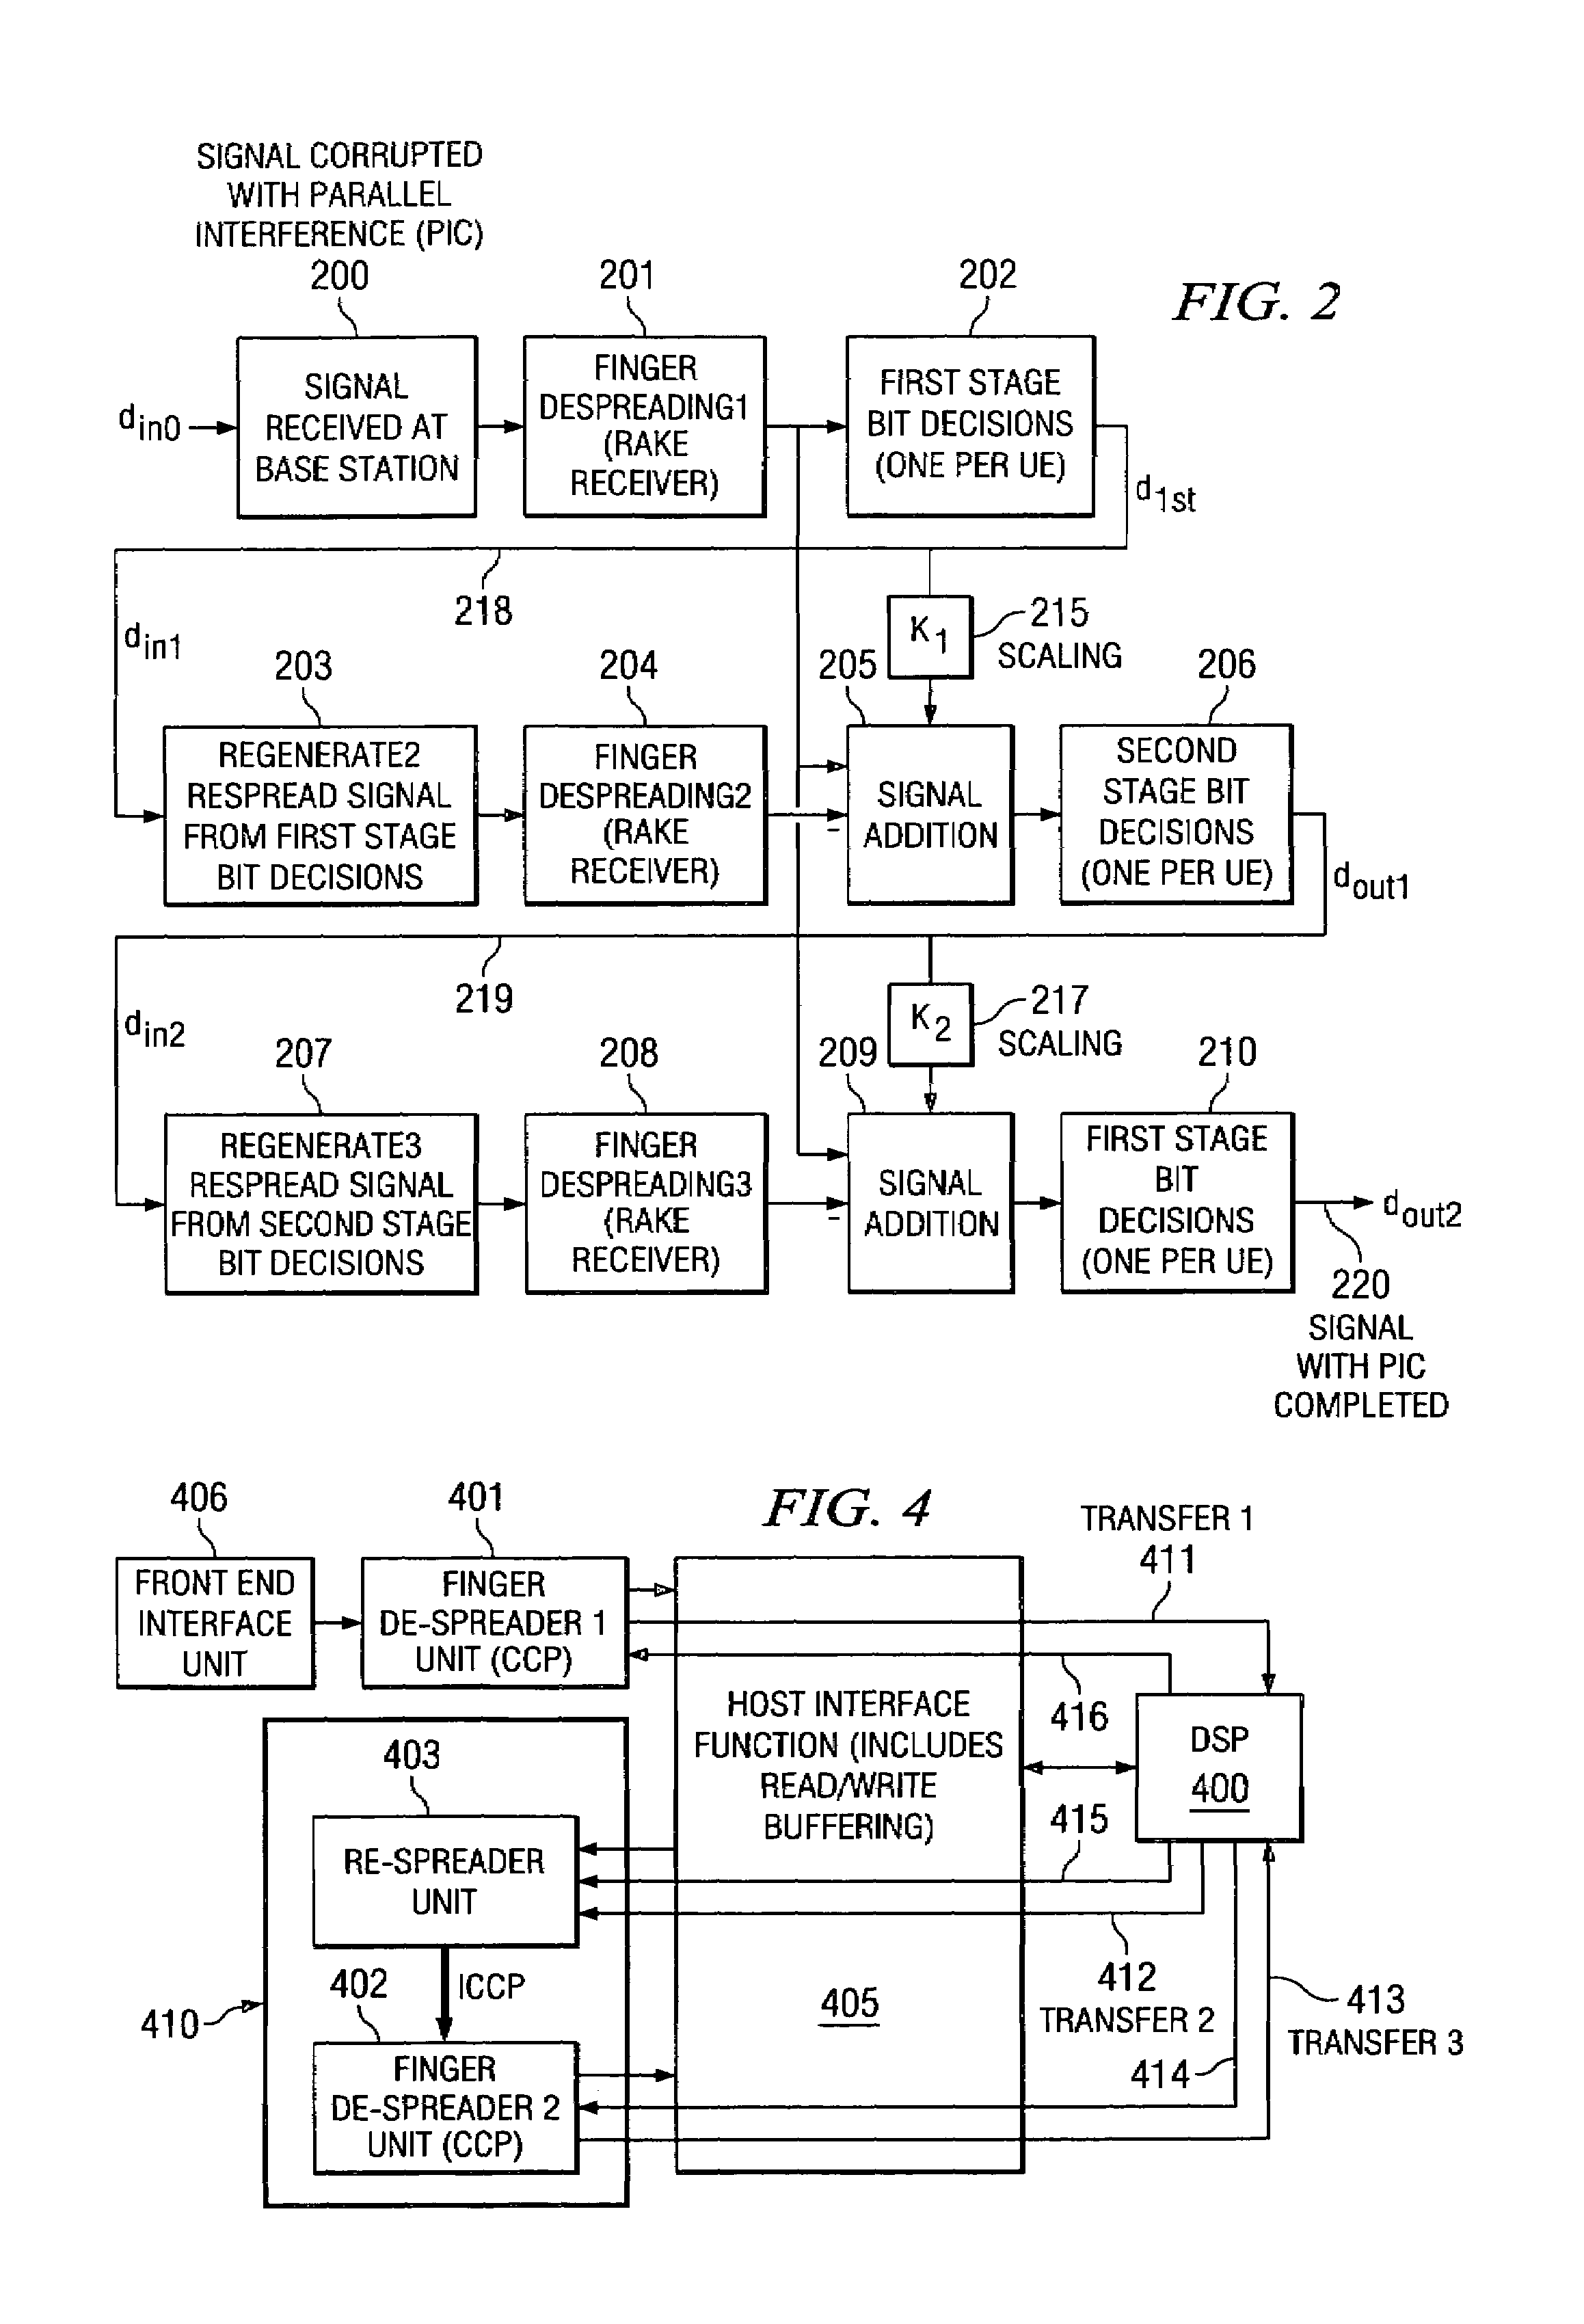 Parallel interference cancellation device for multi-user CDMA systems